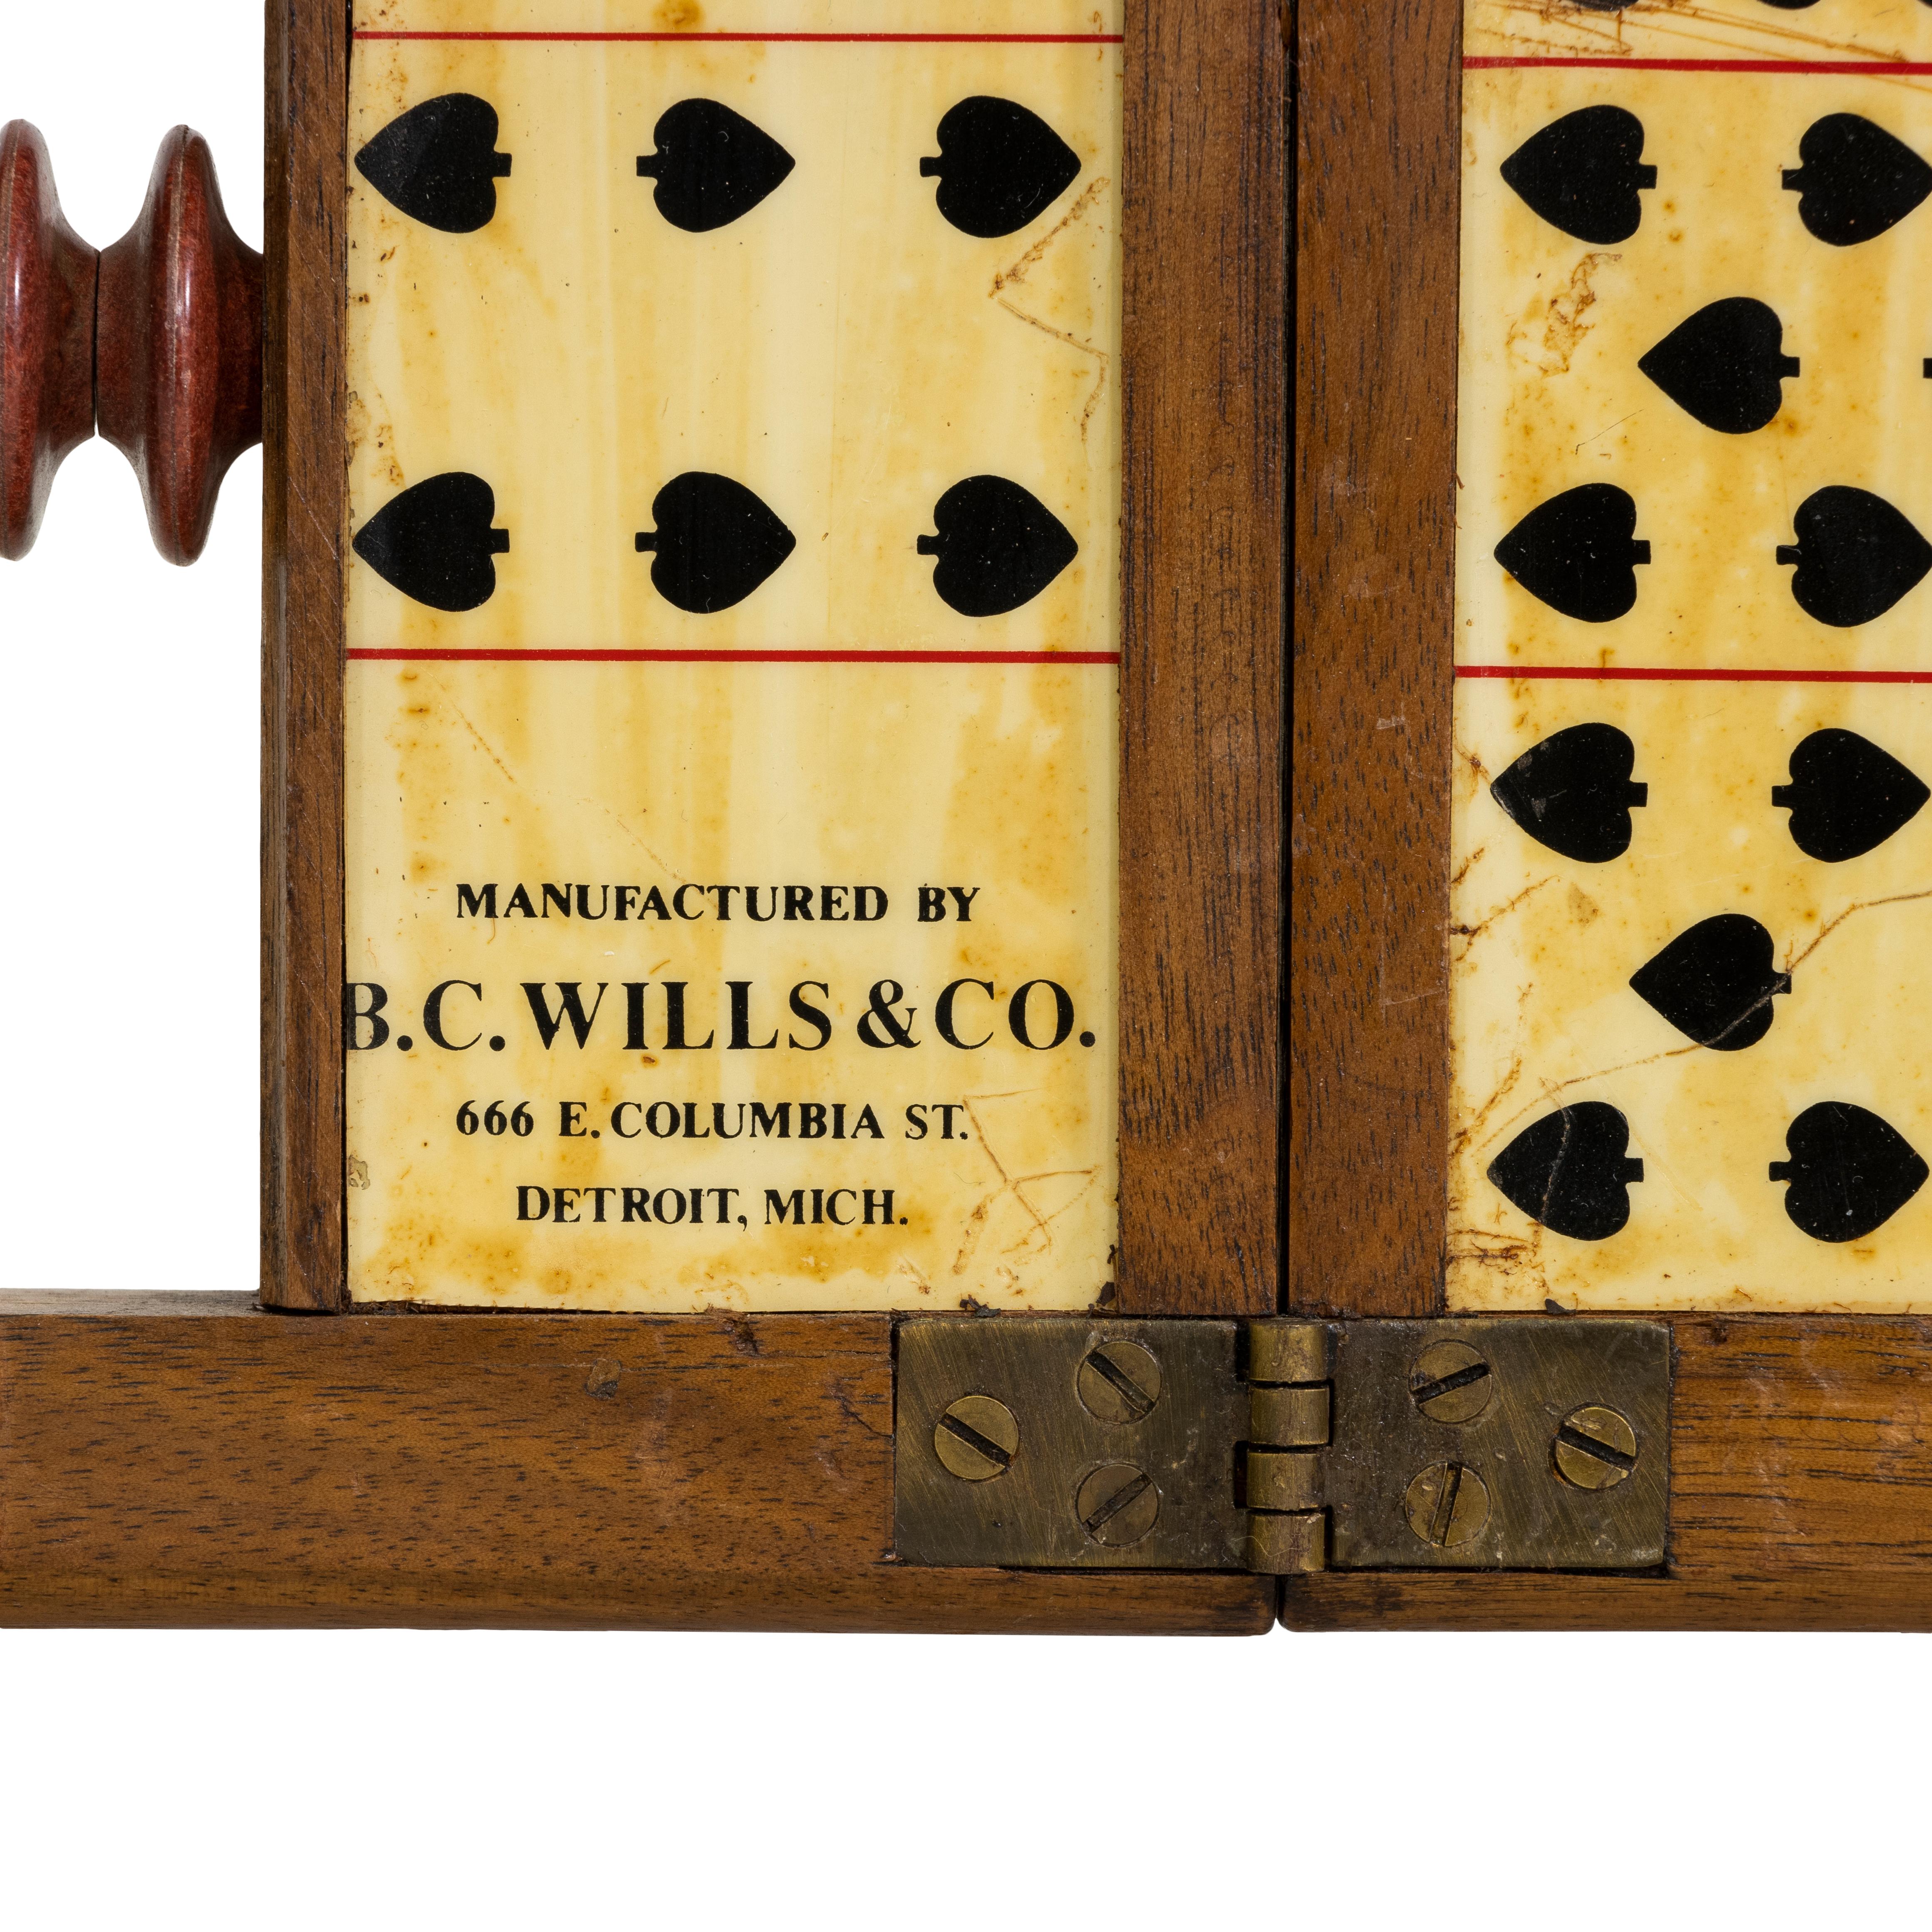 Faro case keeper in spades by B.C. Willis & Co., 666 E. Columbia St. Detroit, Michigan. This counter is folding type of walnut veneer measuring about 12